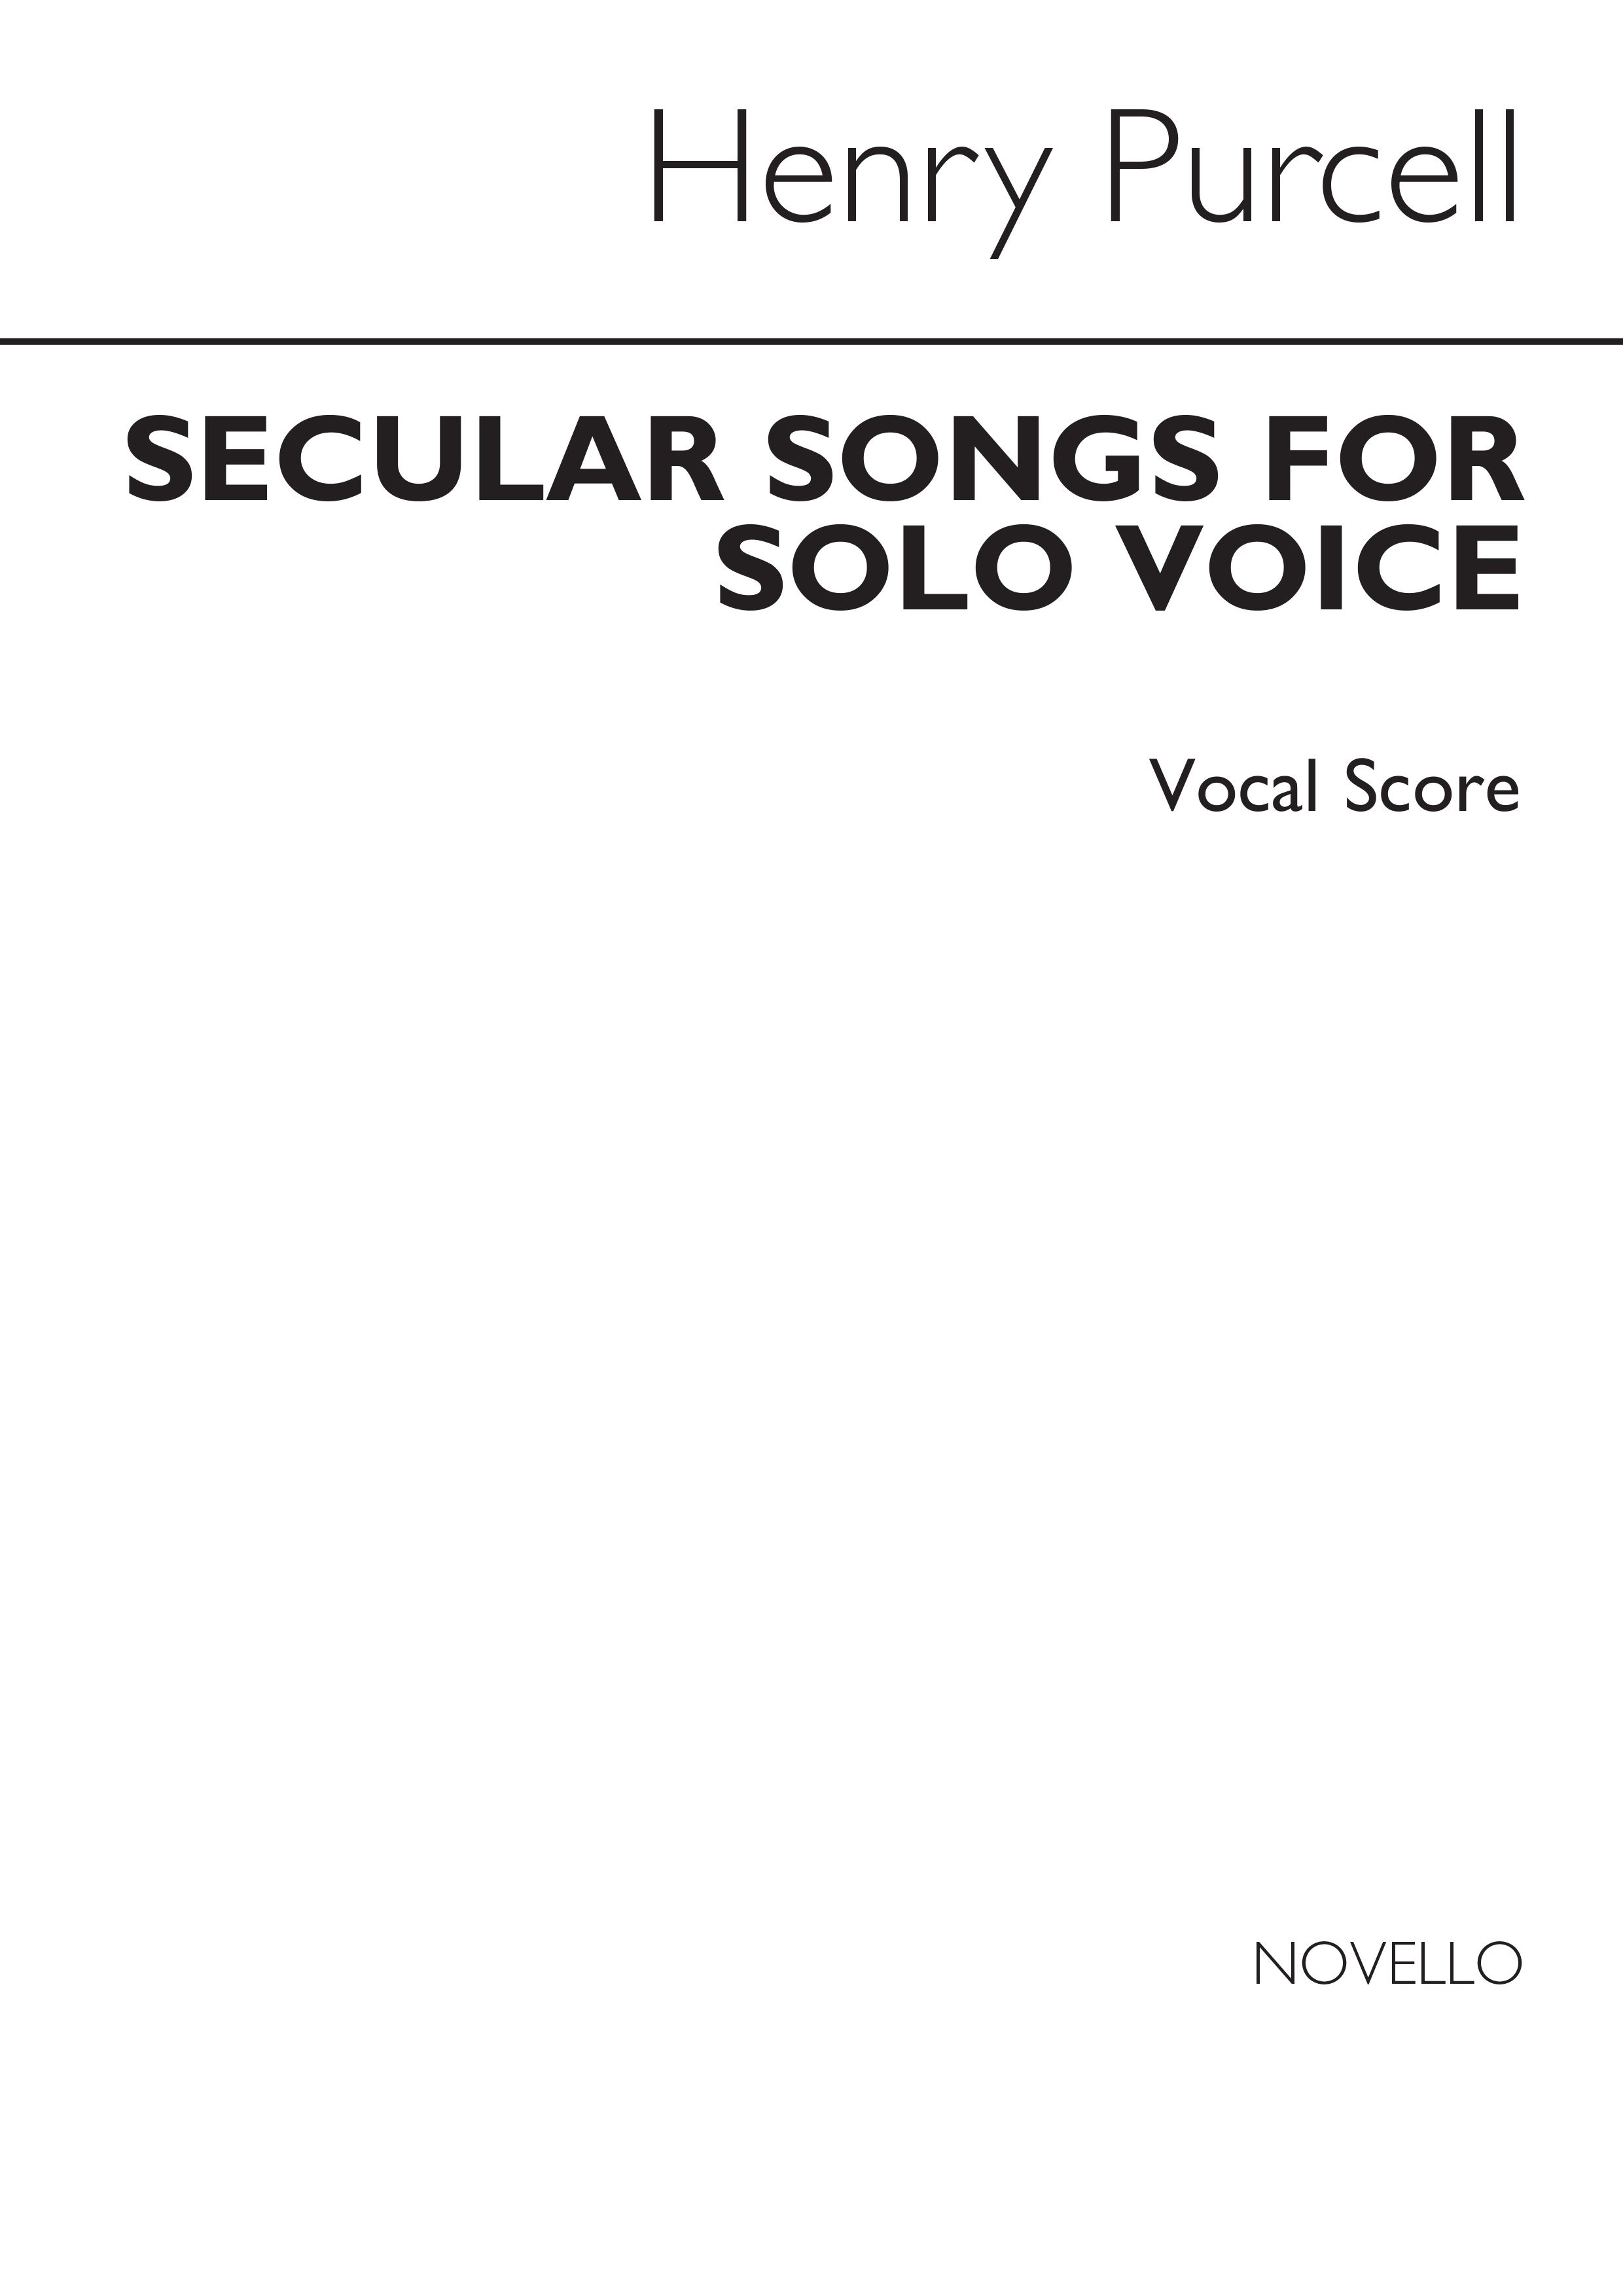 Henry Purcell: Purcell Society Volume 25 - Secular Songs: Voice: Vocal Score